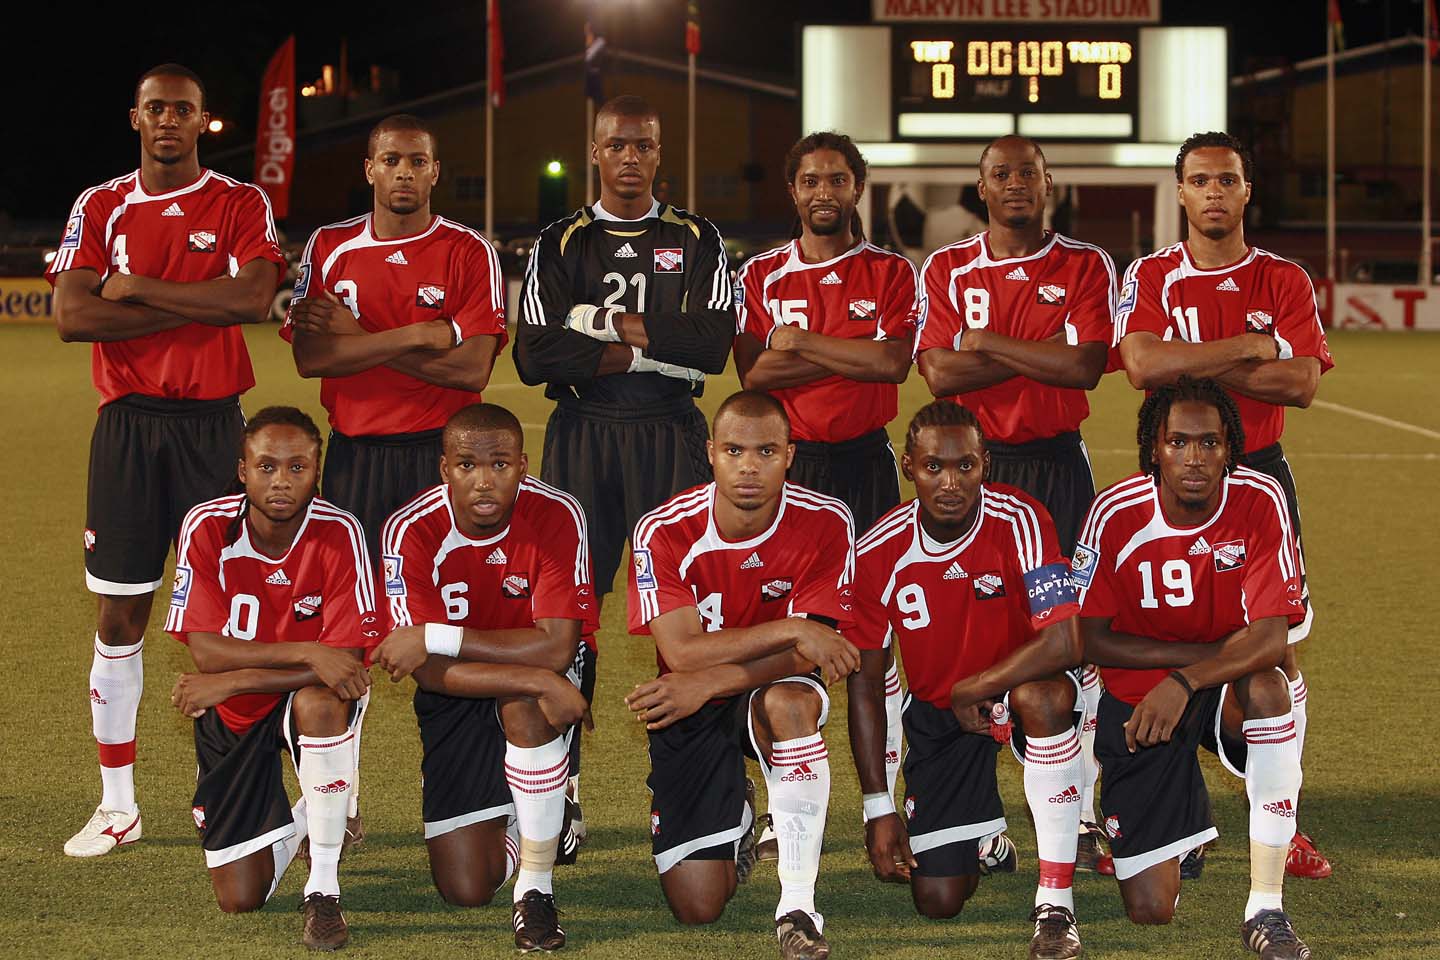 T&T Team line up before St Kitts game (Photo: Digicelfootball.com).